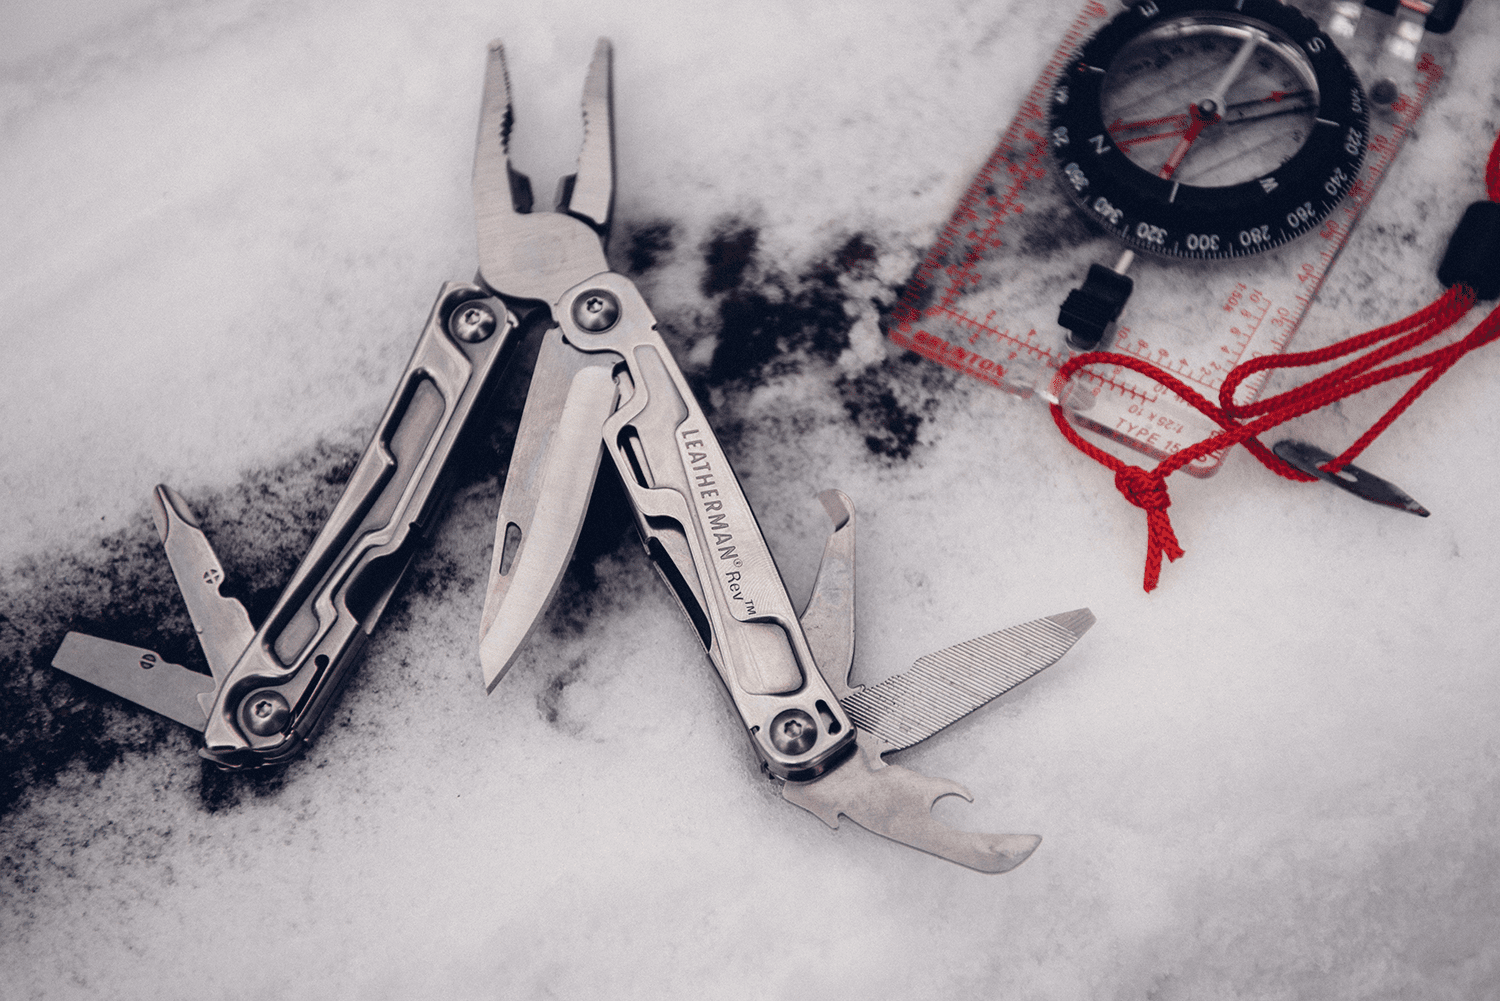 Leatherman Multi-Tool With Compass On Snow